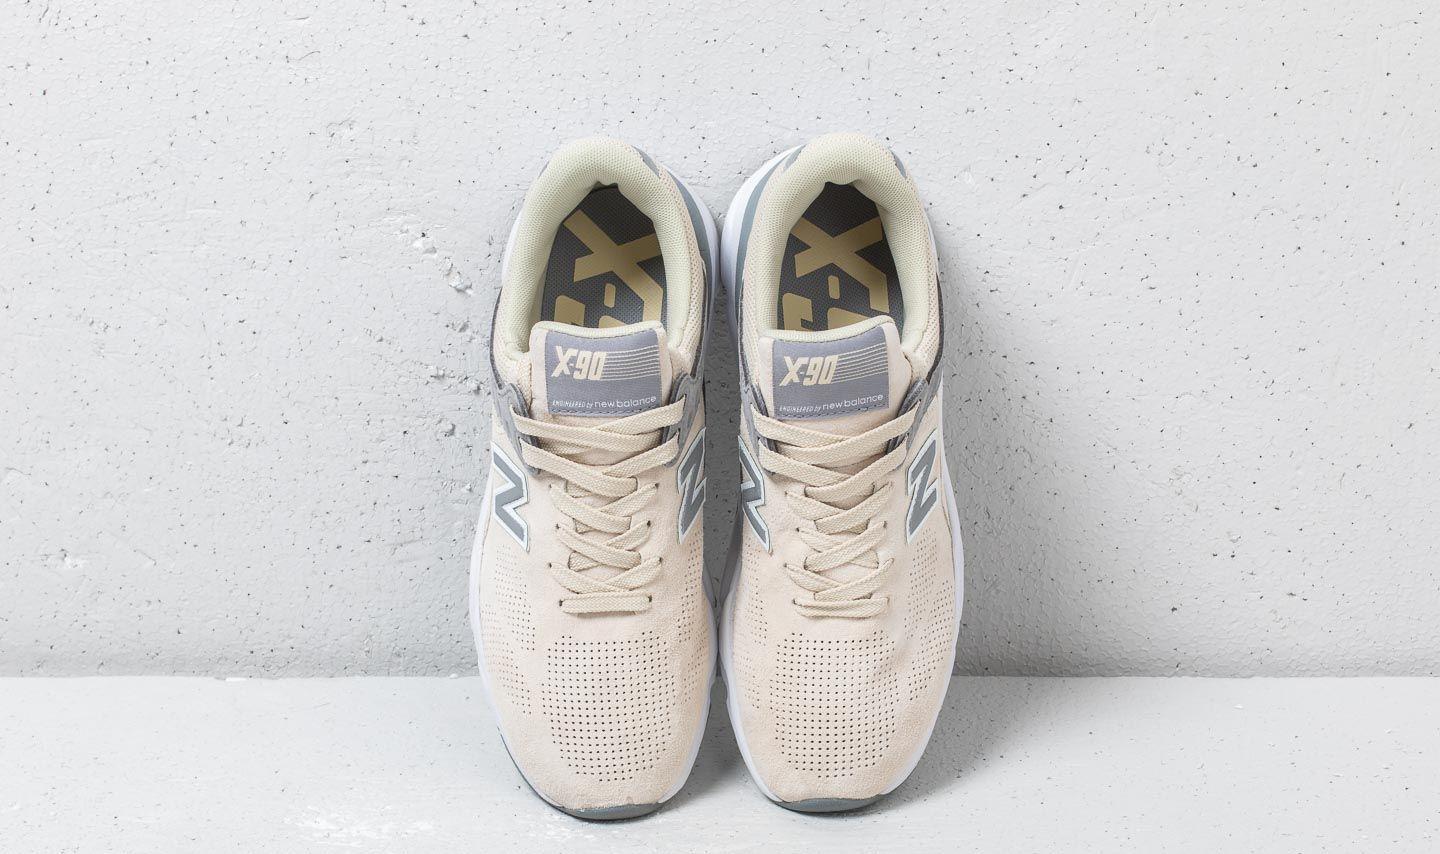 New Balance New Balance X-90 Shoes in White | Lyst